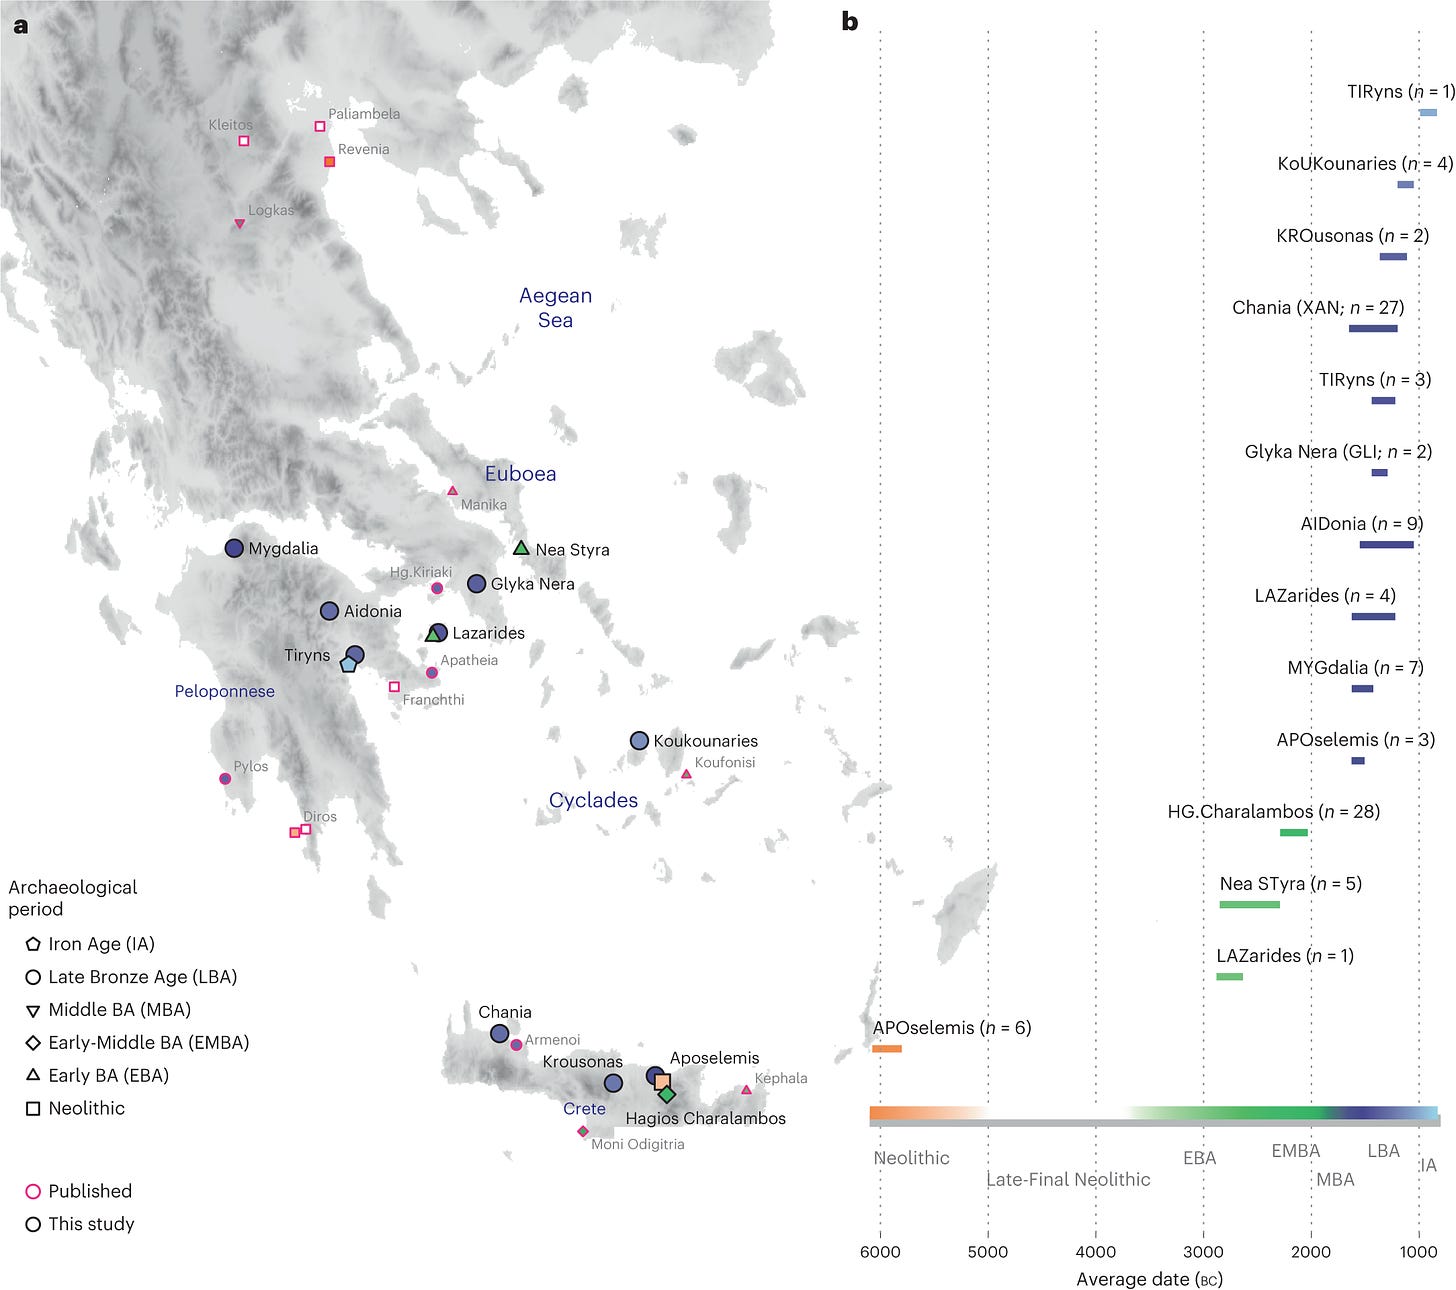 Fig 1. a, Geographical distribution of archaeological sites mentioned in the study annotated by period. Sites with smaller symbols of light outline refer to the published datasets that are co-analysed and follow the same symbol/colour scheme. Data obtained from the same site but different periods, are annotated with jittering points. b, The number of individuals analysed and their date range based on archaeological chronology or radiocarbon dating. Site names are abbreviated in three-letter capitalized identifiers as indicated in the labels